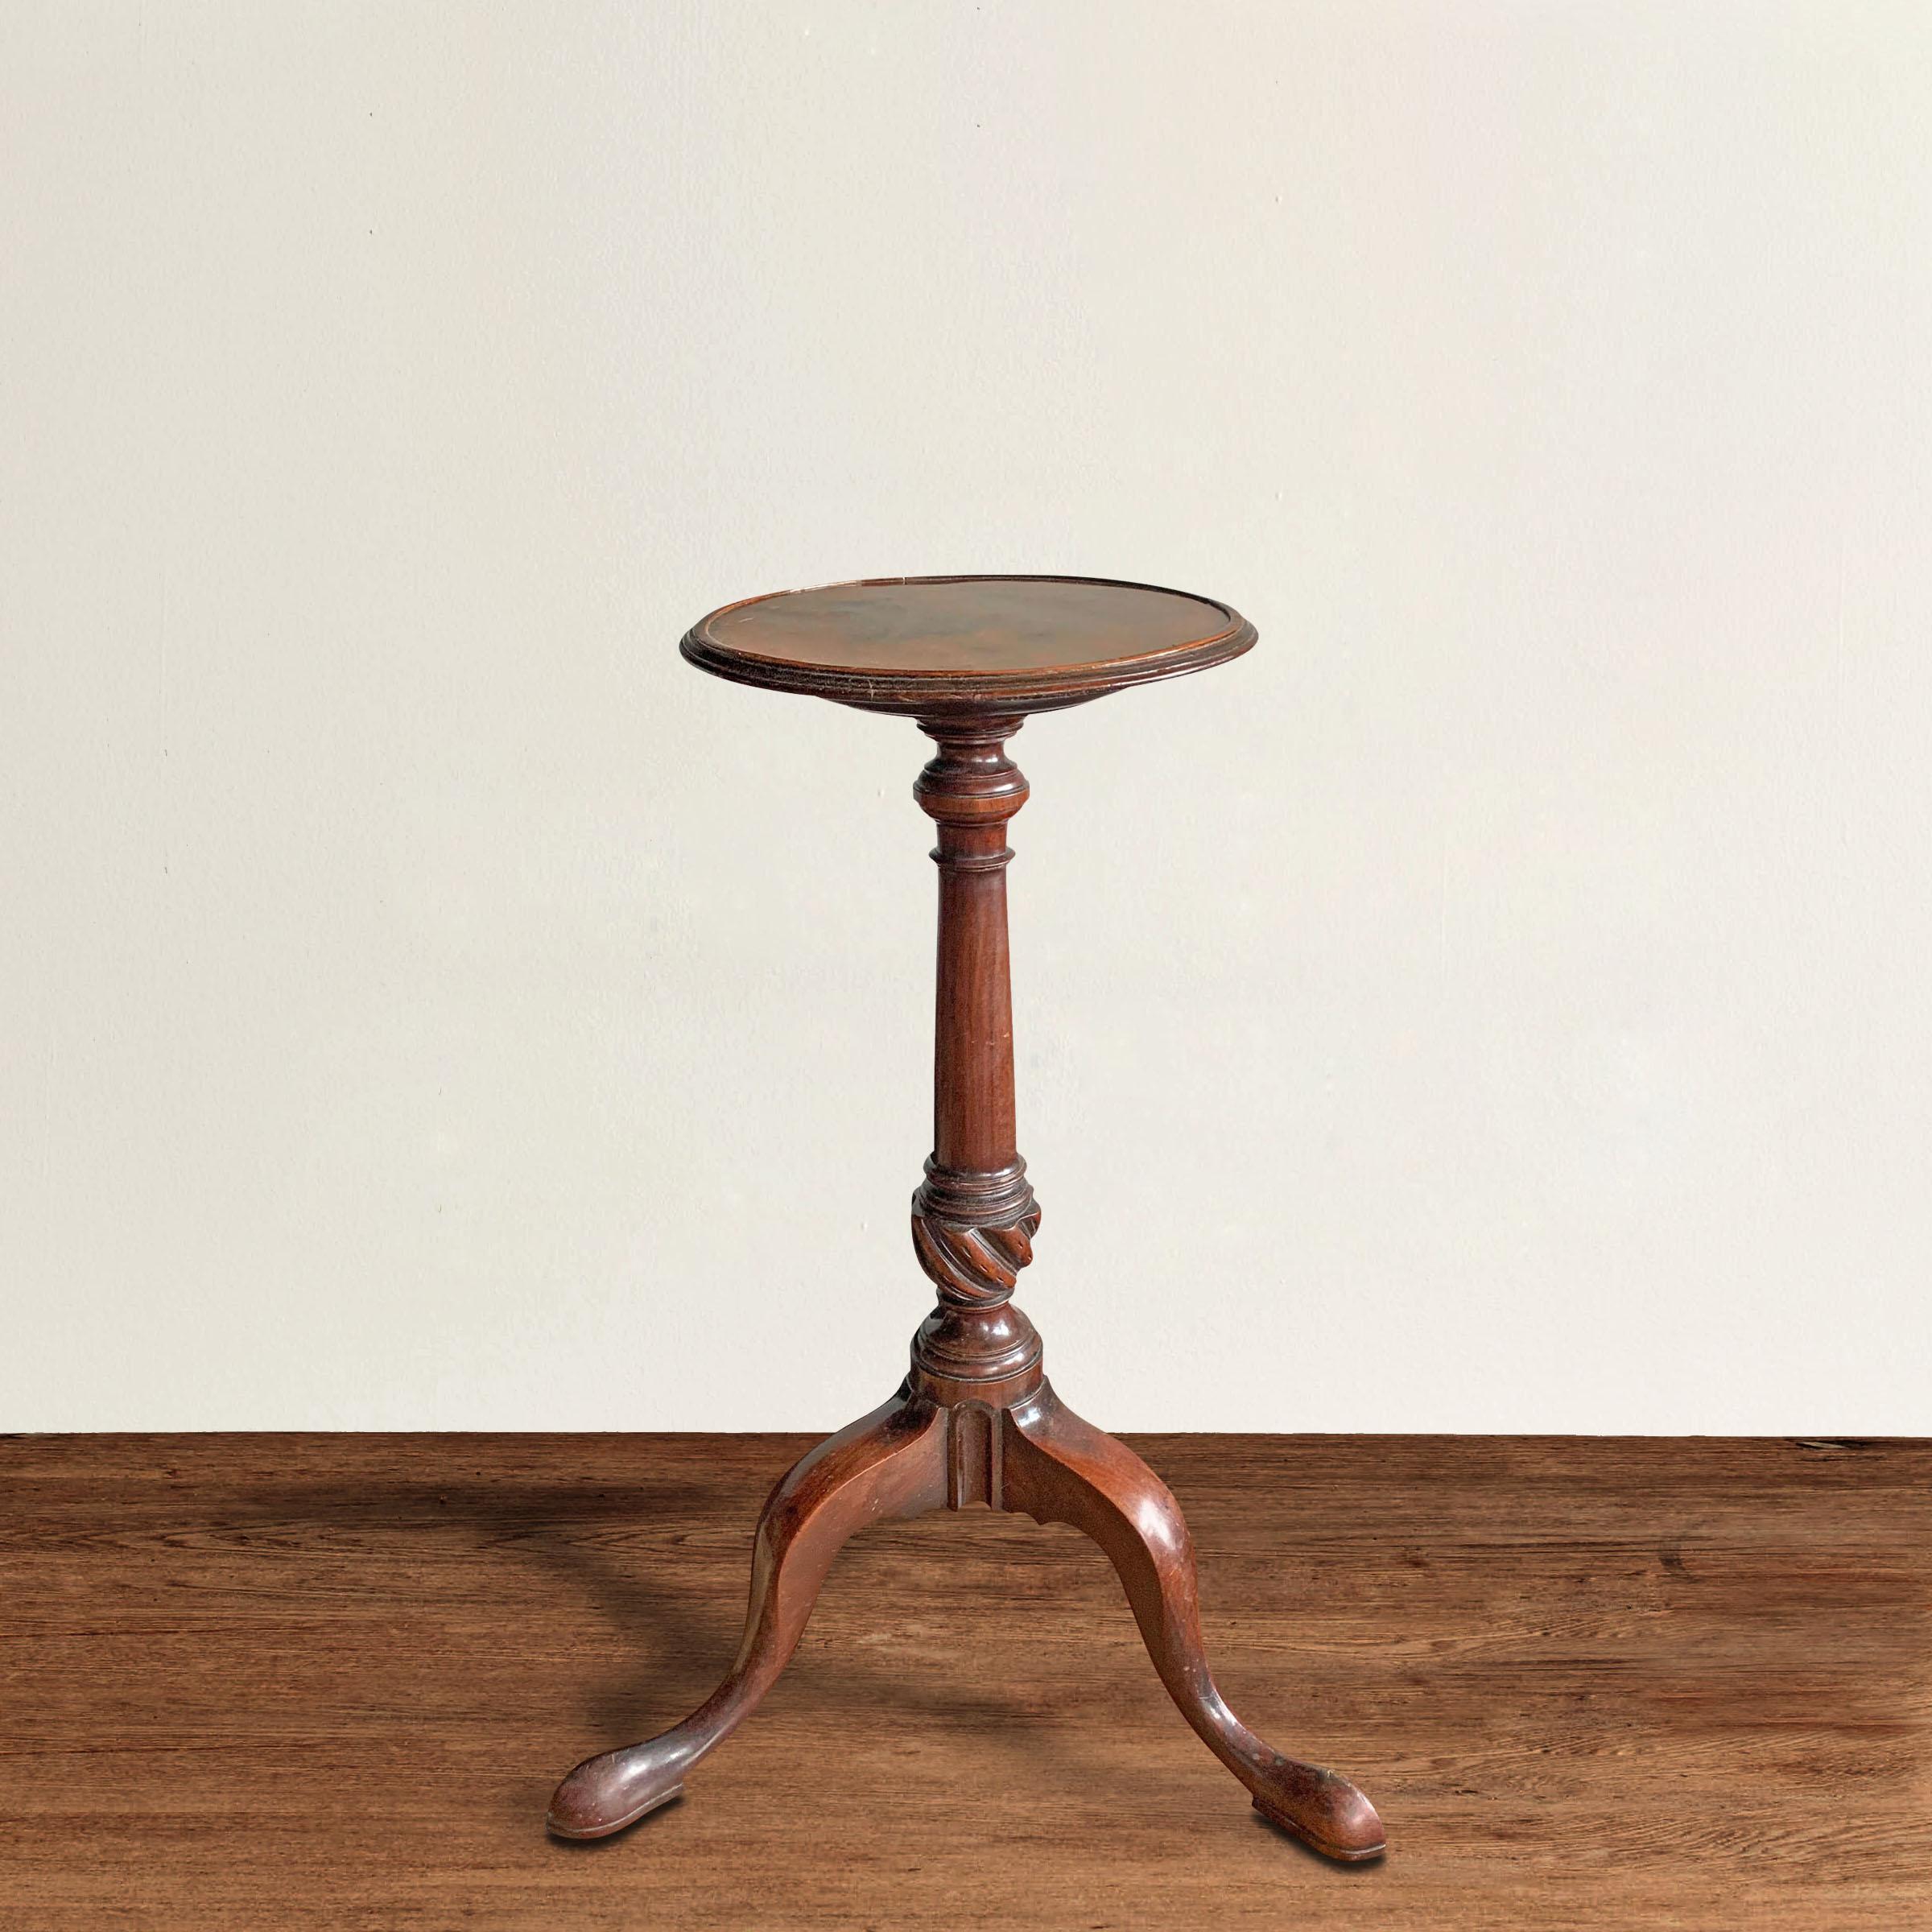 A fantastic 18th century American Queen Anne style mahogany candle stand with a turned column with a carved twisted knuckle, and three cabriole legs with pad feet. Originally intended to support of candle stick, this table is the perfect drink's